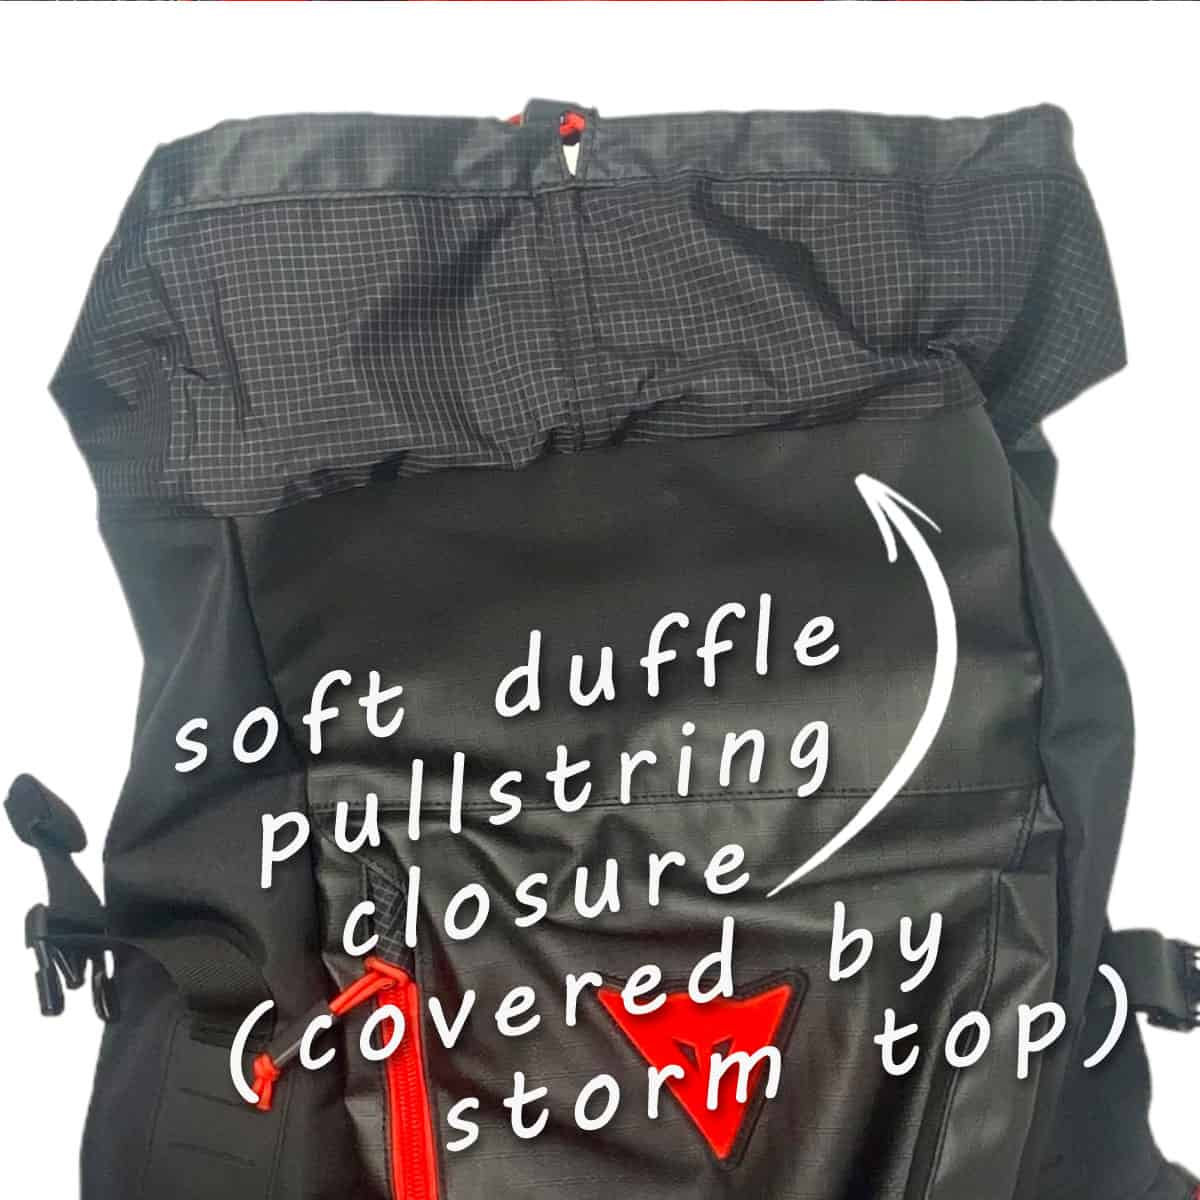 The Dainese D-Throttle Riding Backpack is a reliable and versatile choice designed for everyday use - inside top closure